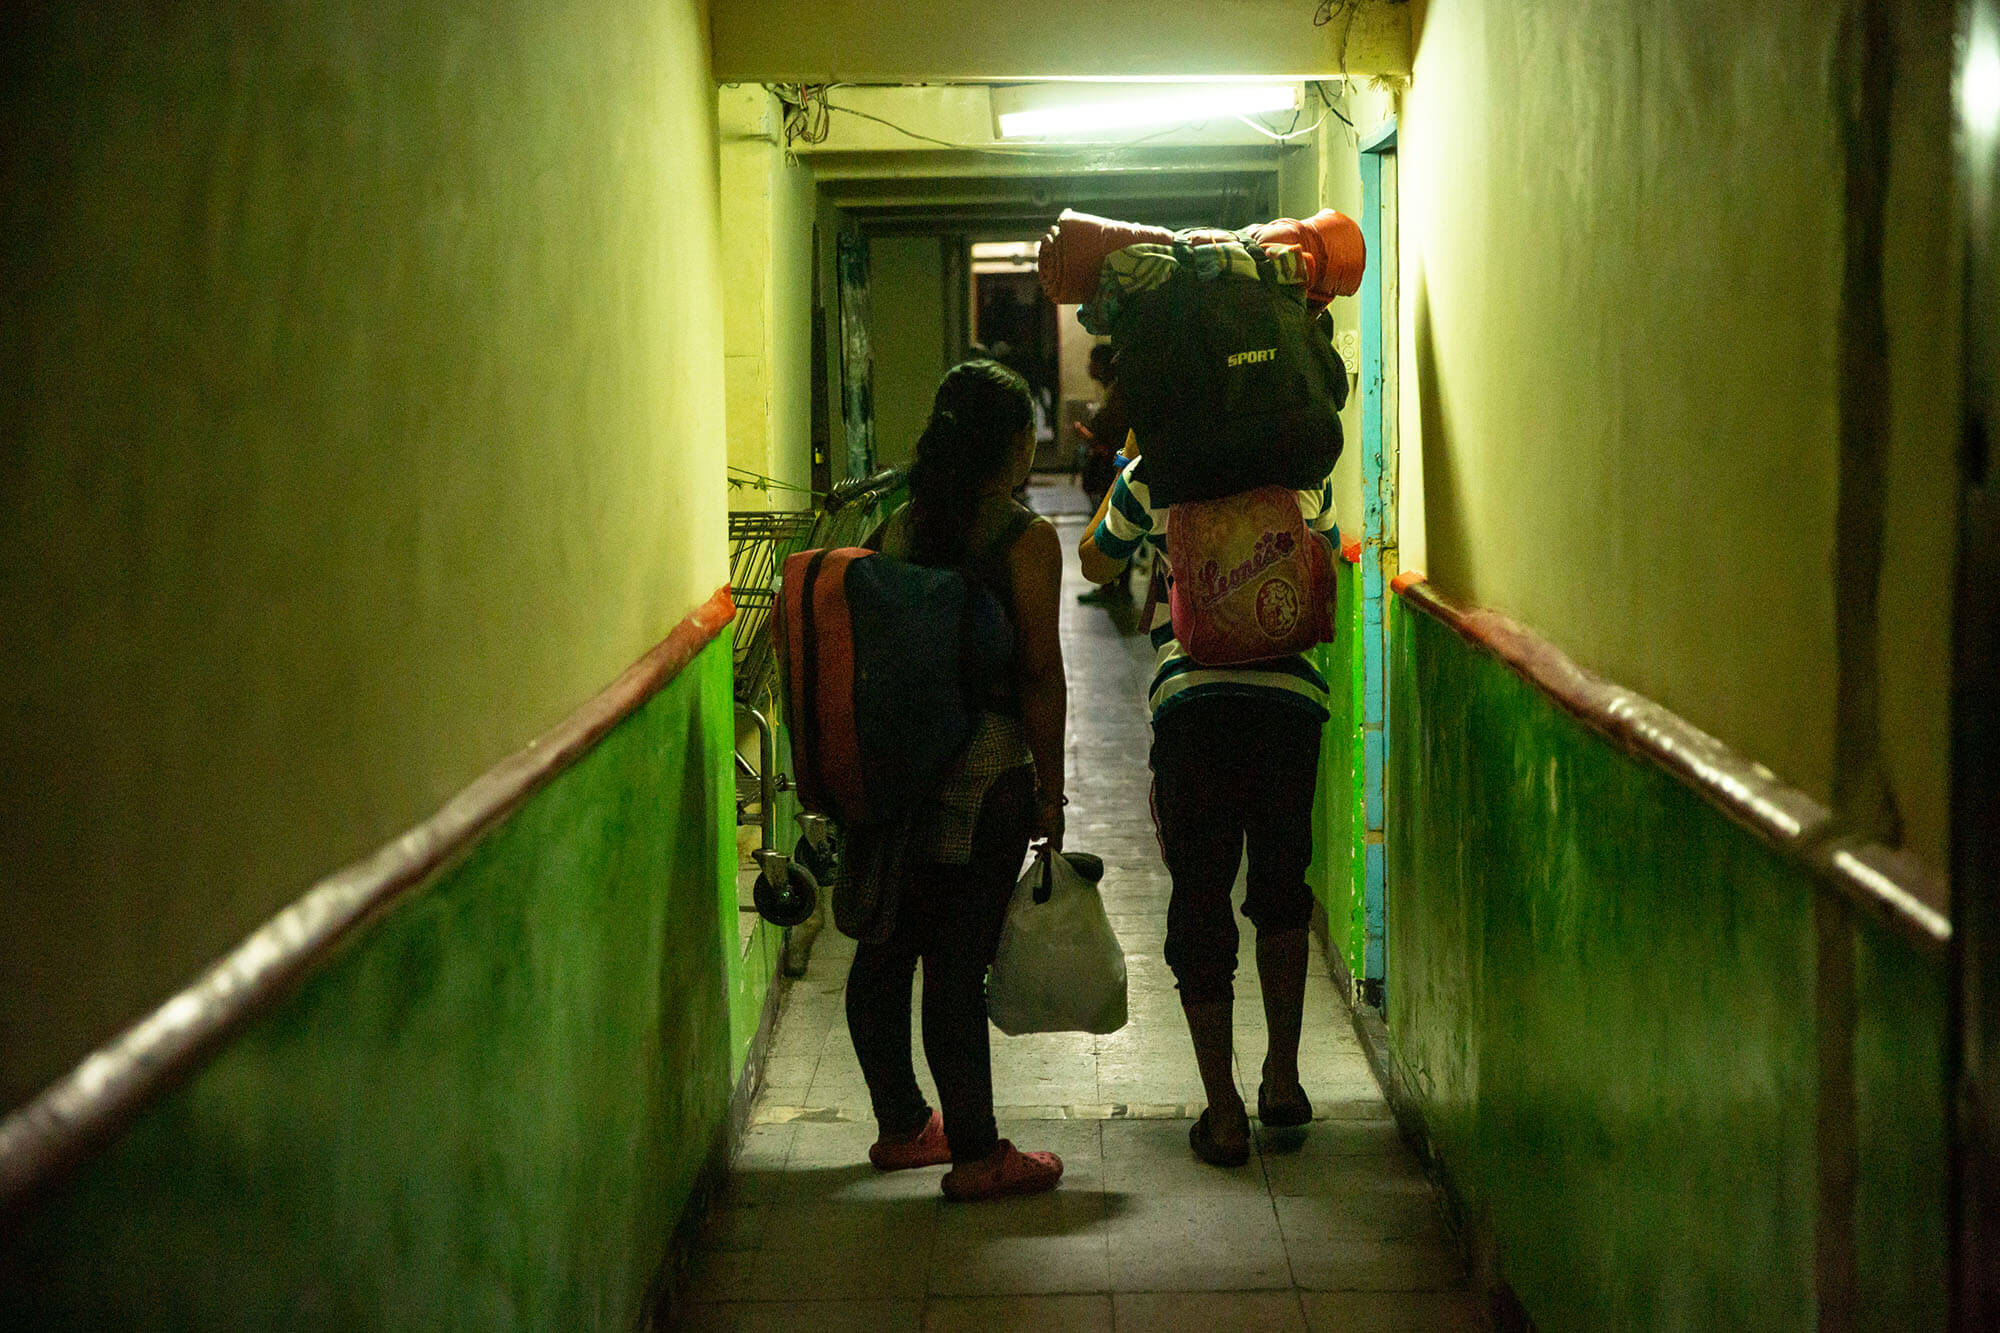 A man and a woman stand in a dimly lit green hallway